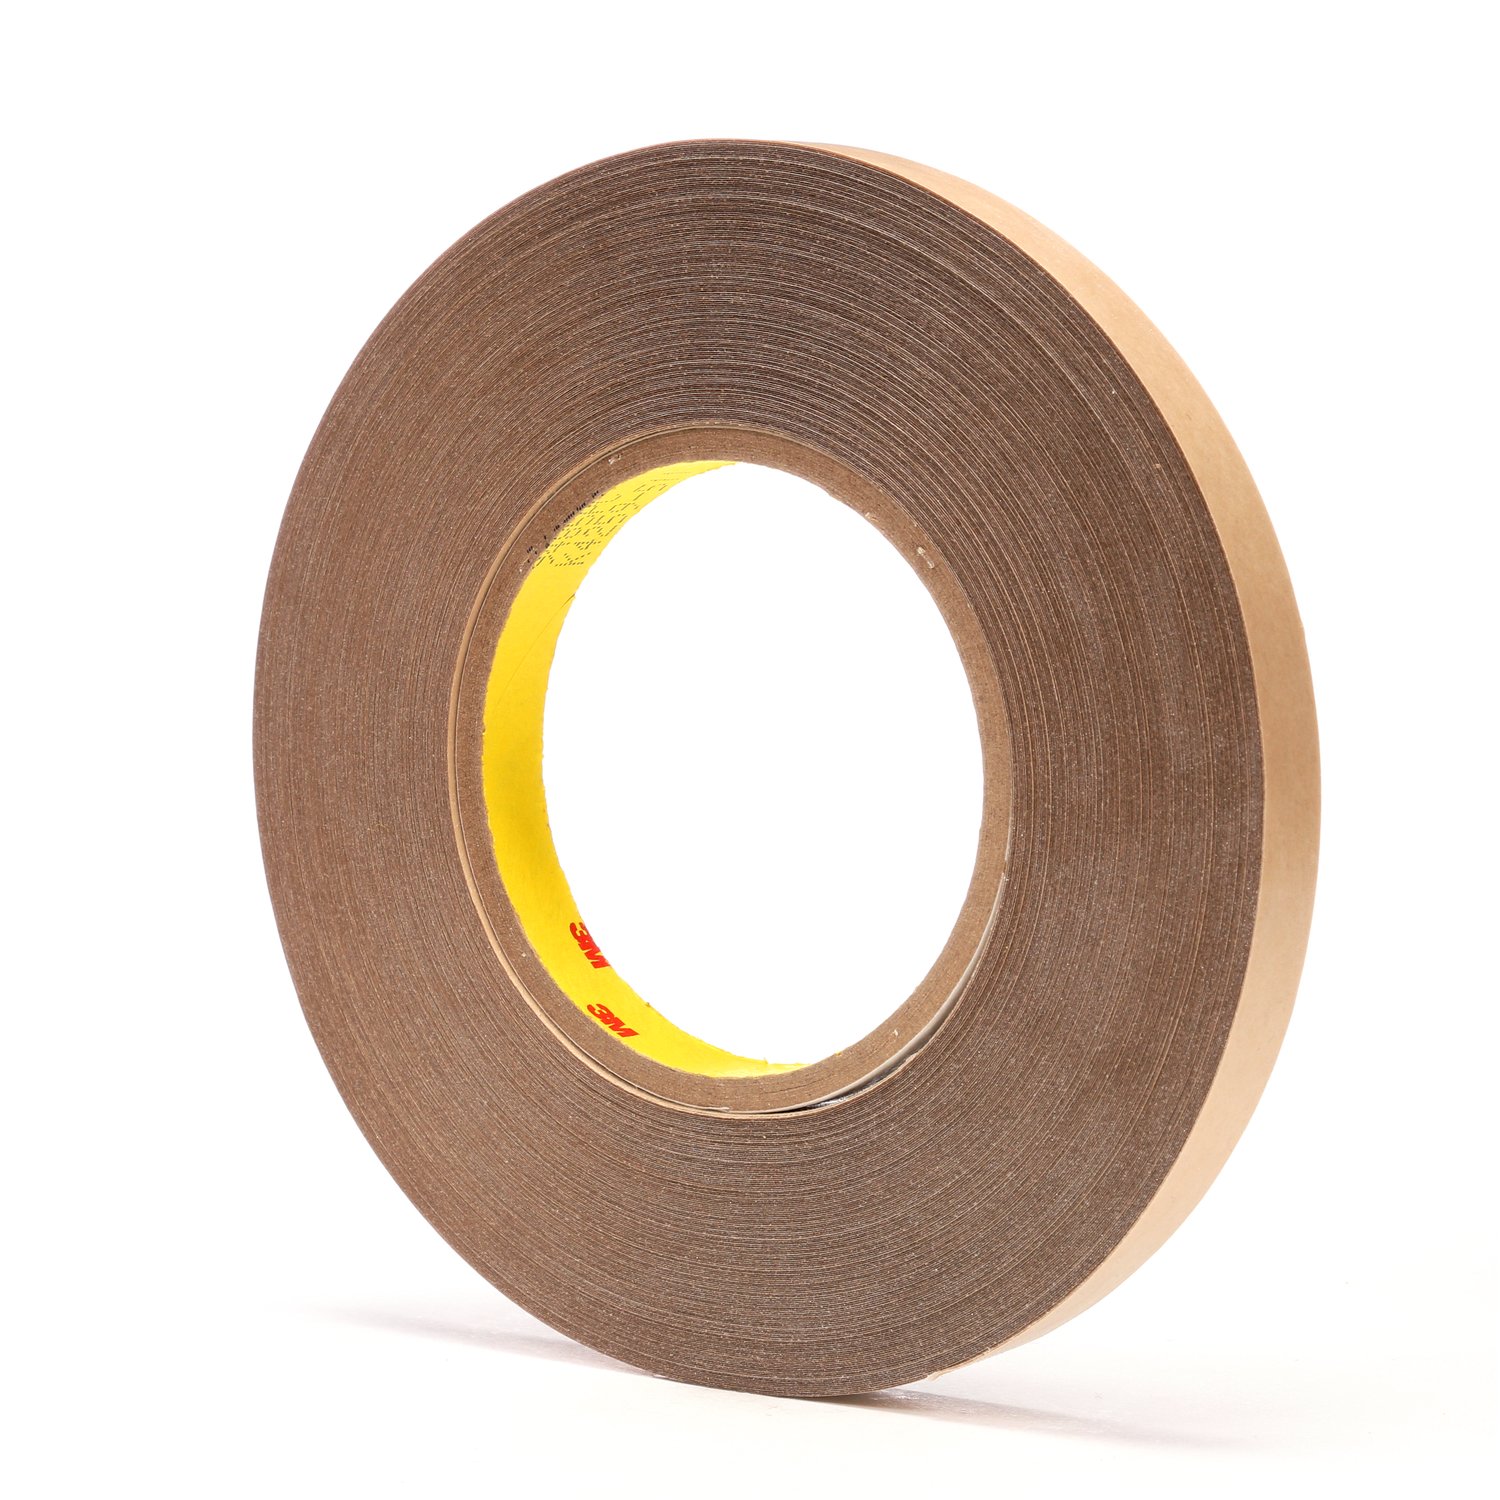 7000123366 - 3M Adhesive Transfer Tape 9485PC, Clear, 1/2 in x 60 yd, 5 mil, 72
rolls per case